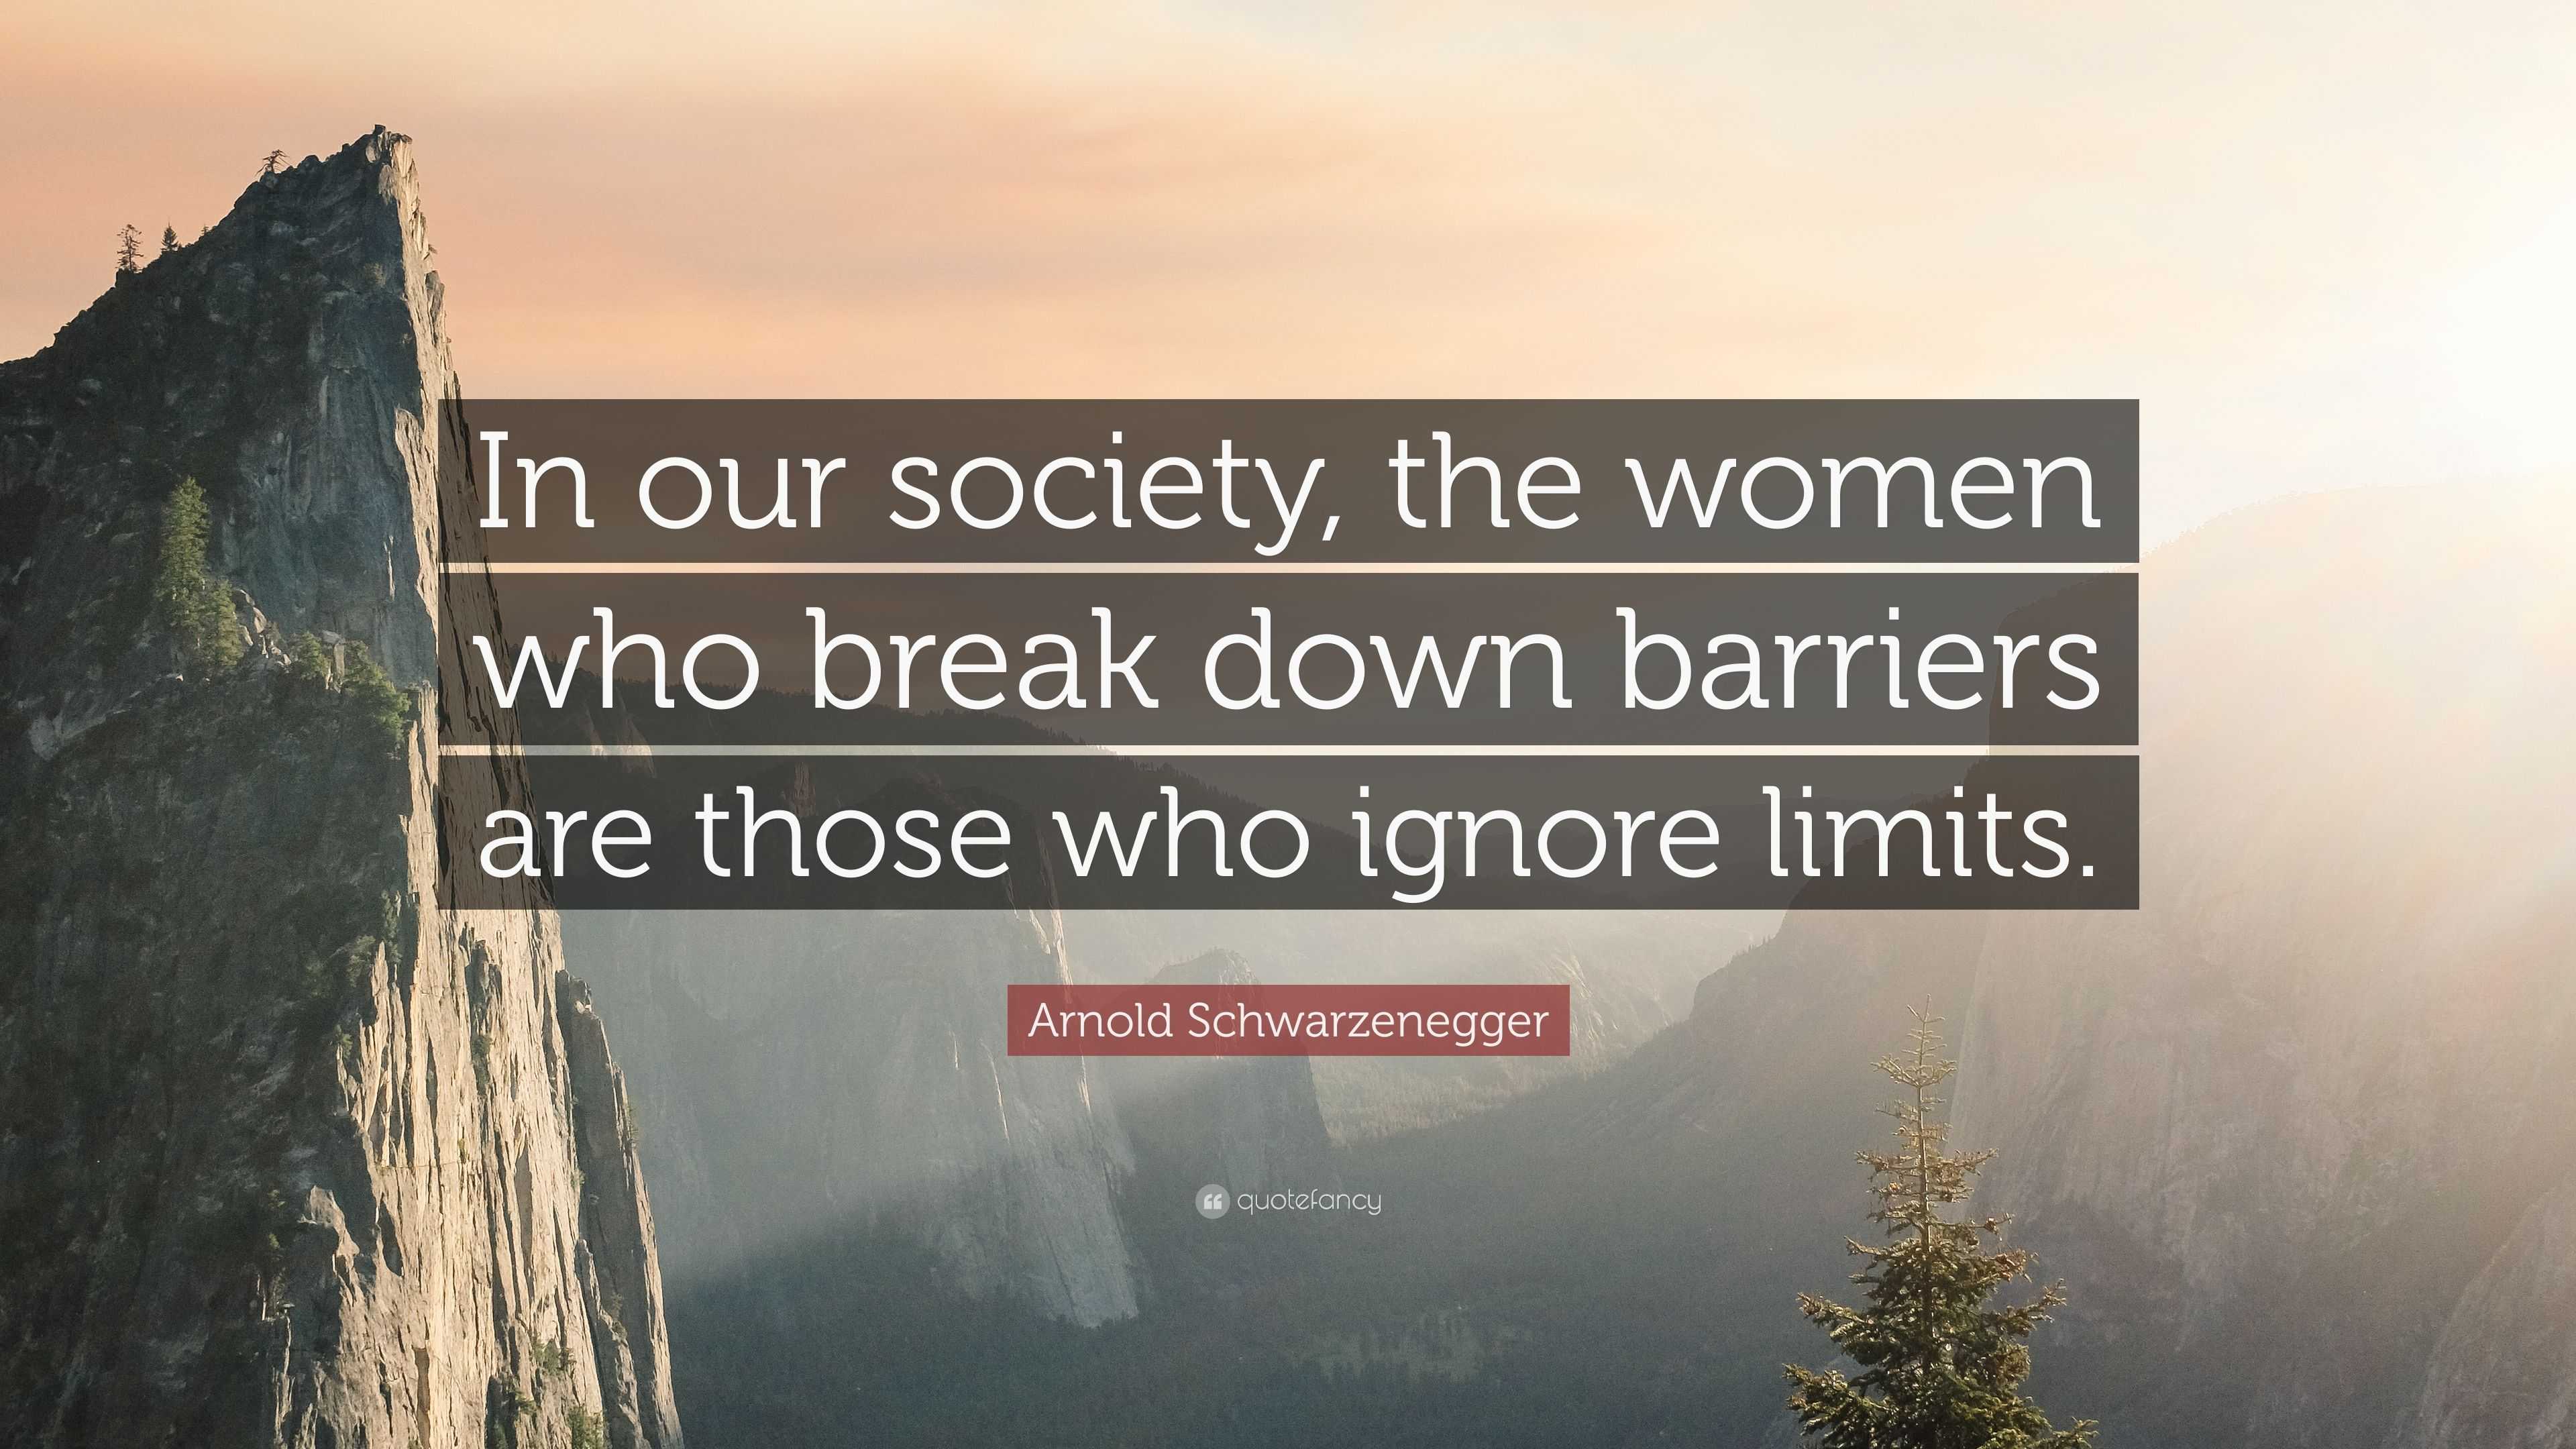 Arnold Schwarzenegger Quote: “In our society, the women who break down